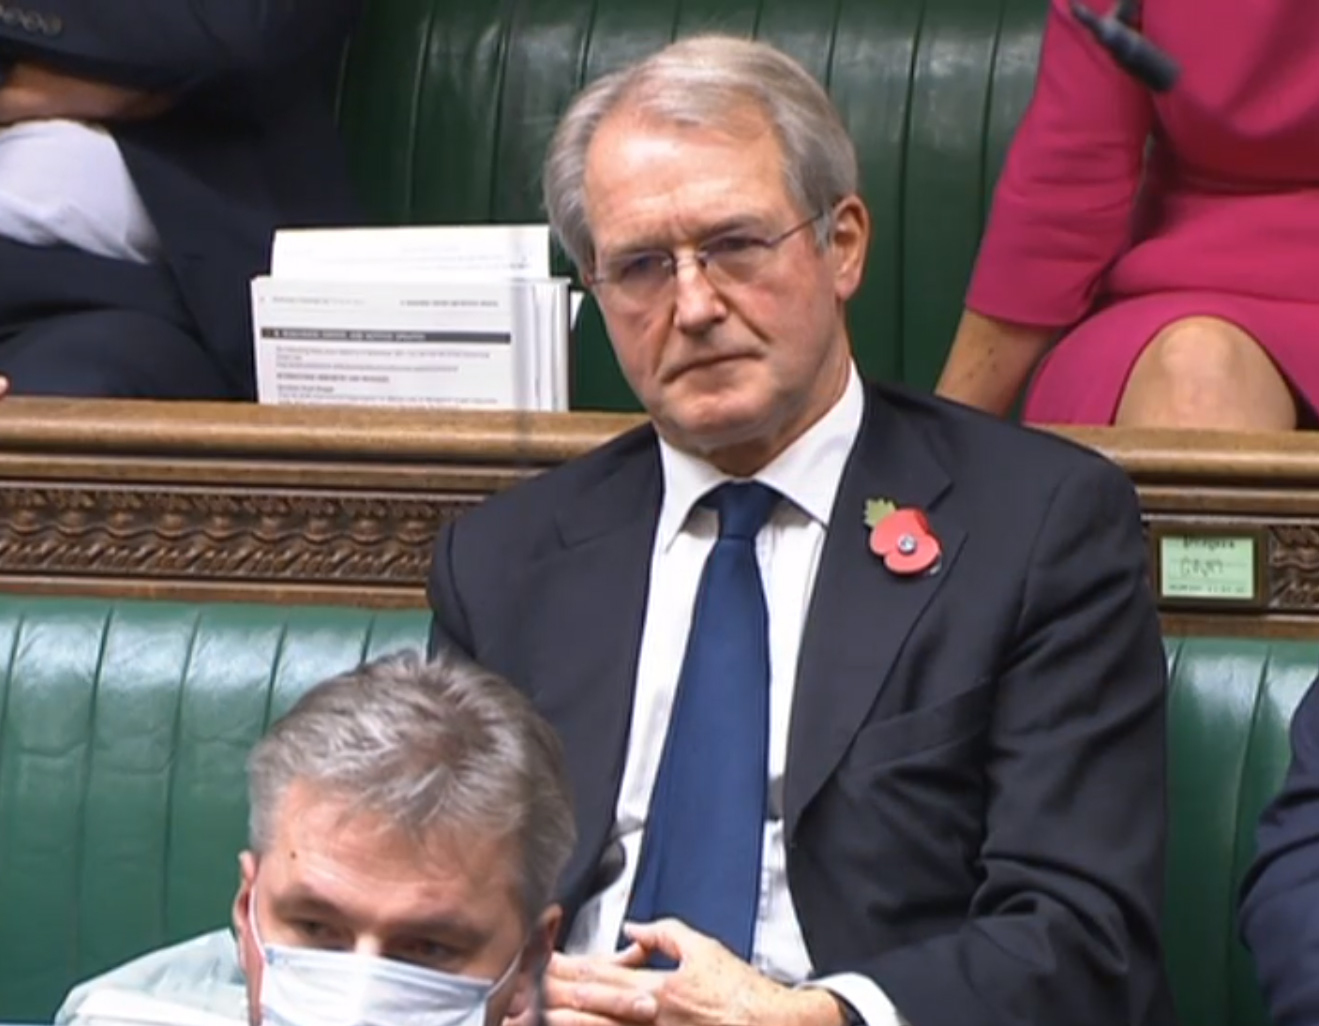 Former Cabinet minister Owen Paterson in the House of Commons, London, as MPs debated an amendment calling for a review of his case after he received a six-week ban from Parliament over an egregious breach of lobbying rules. Picture date: Wednesday